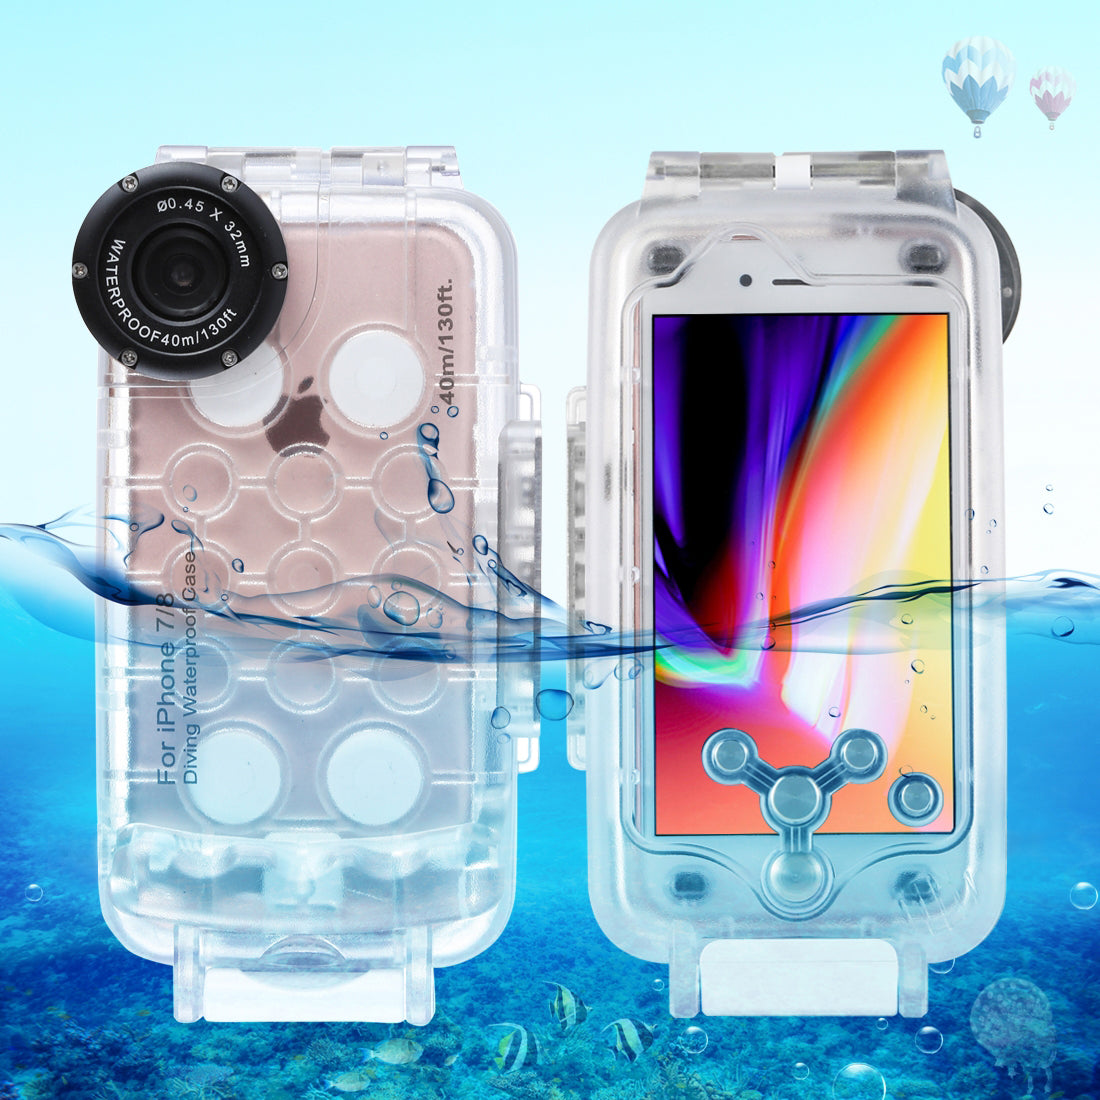 HAWEEL 40m/130ft Waterproof Diving Housing Photo Video Taking Underwater Cover Case for iPhone 7 & 8(Transparent)